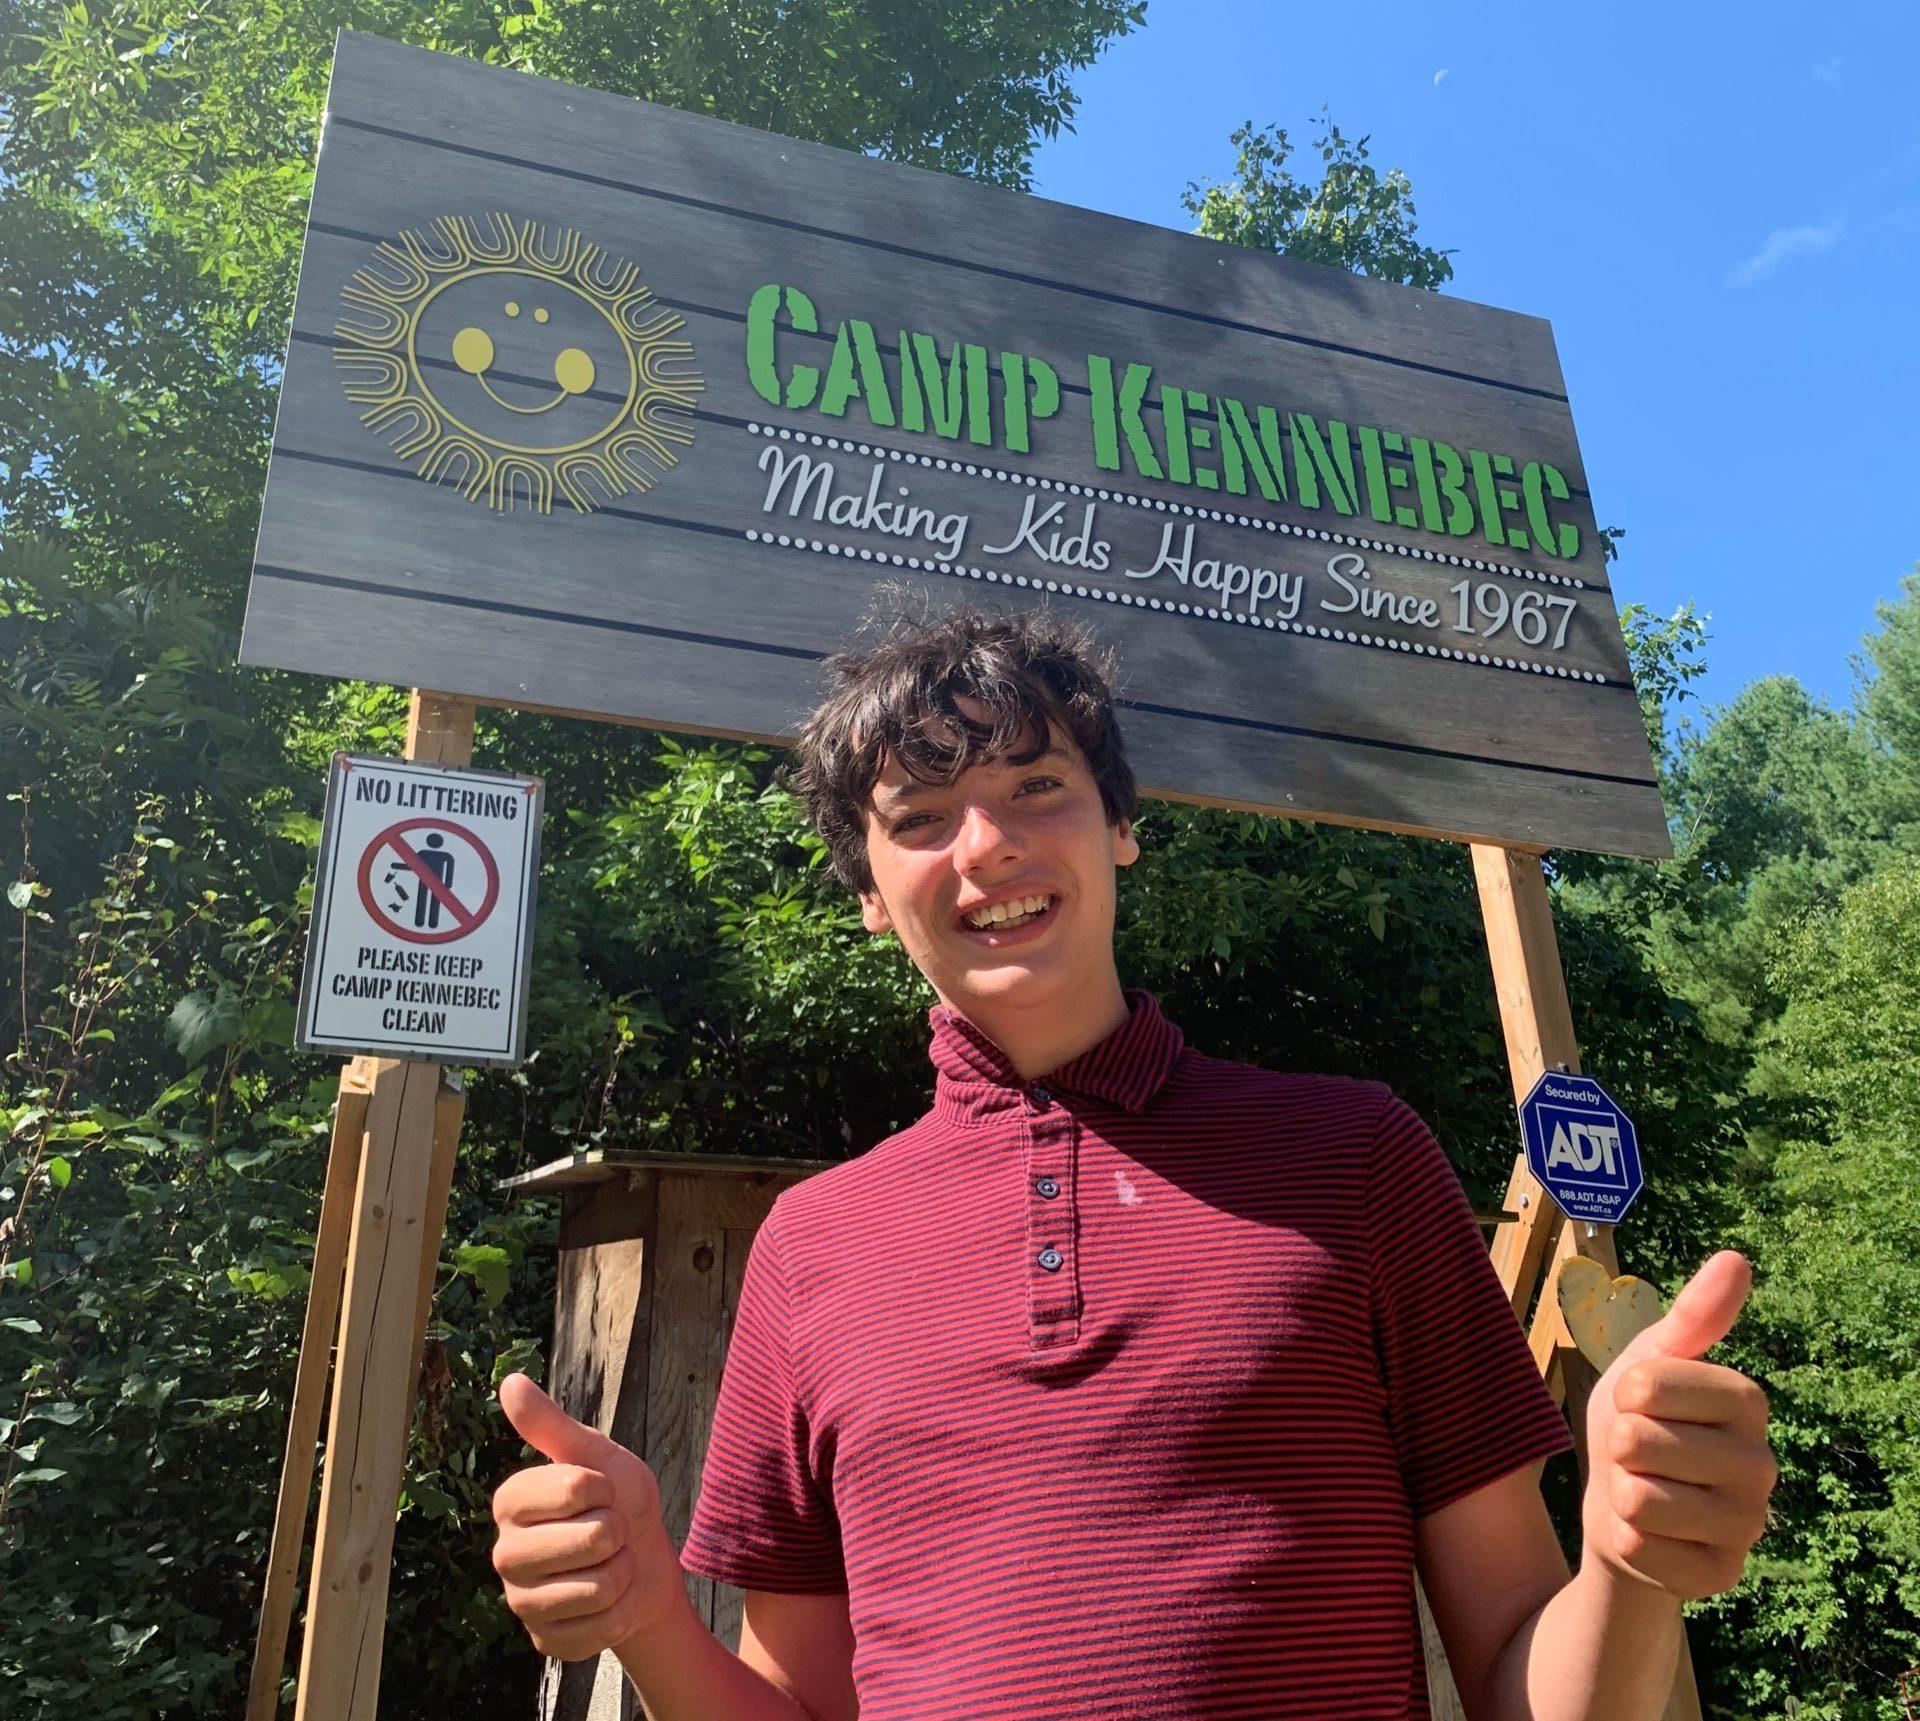 Male teen camper smiling and giving two thumbs up in front of the Camp Kennebec sign.